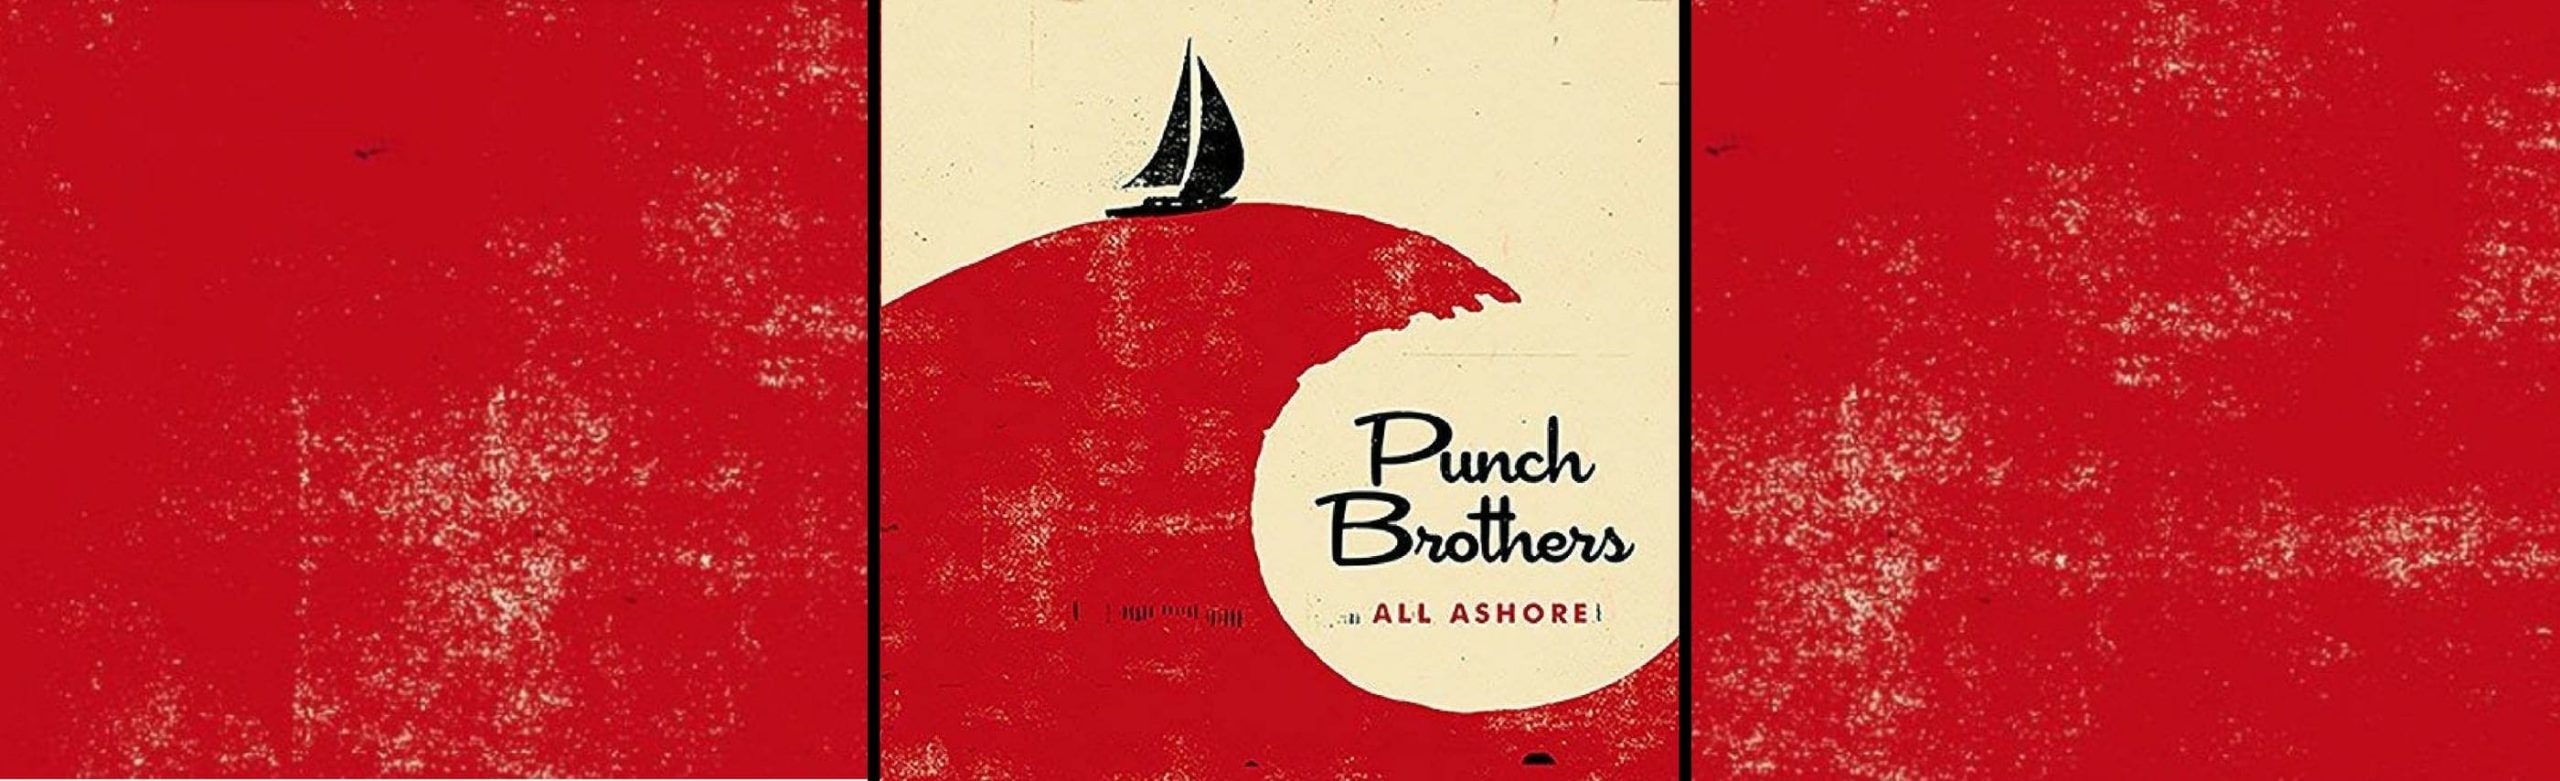 LISTEN: Punch Brothers Release New Album Image